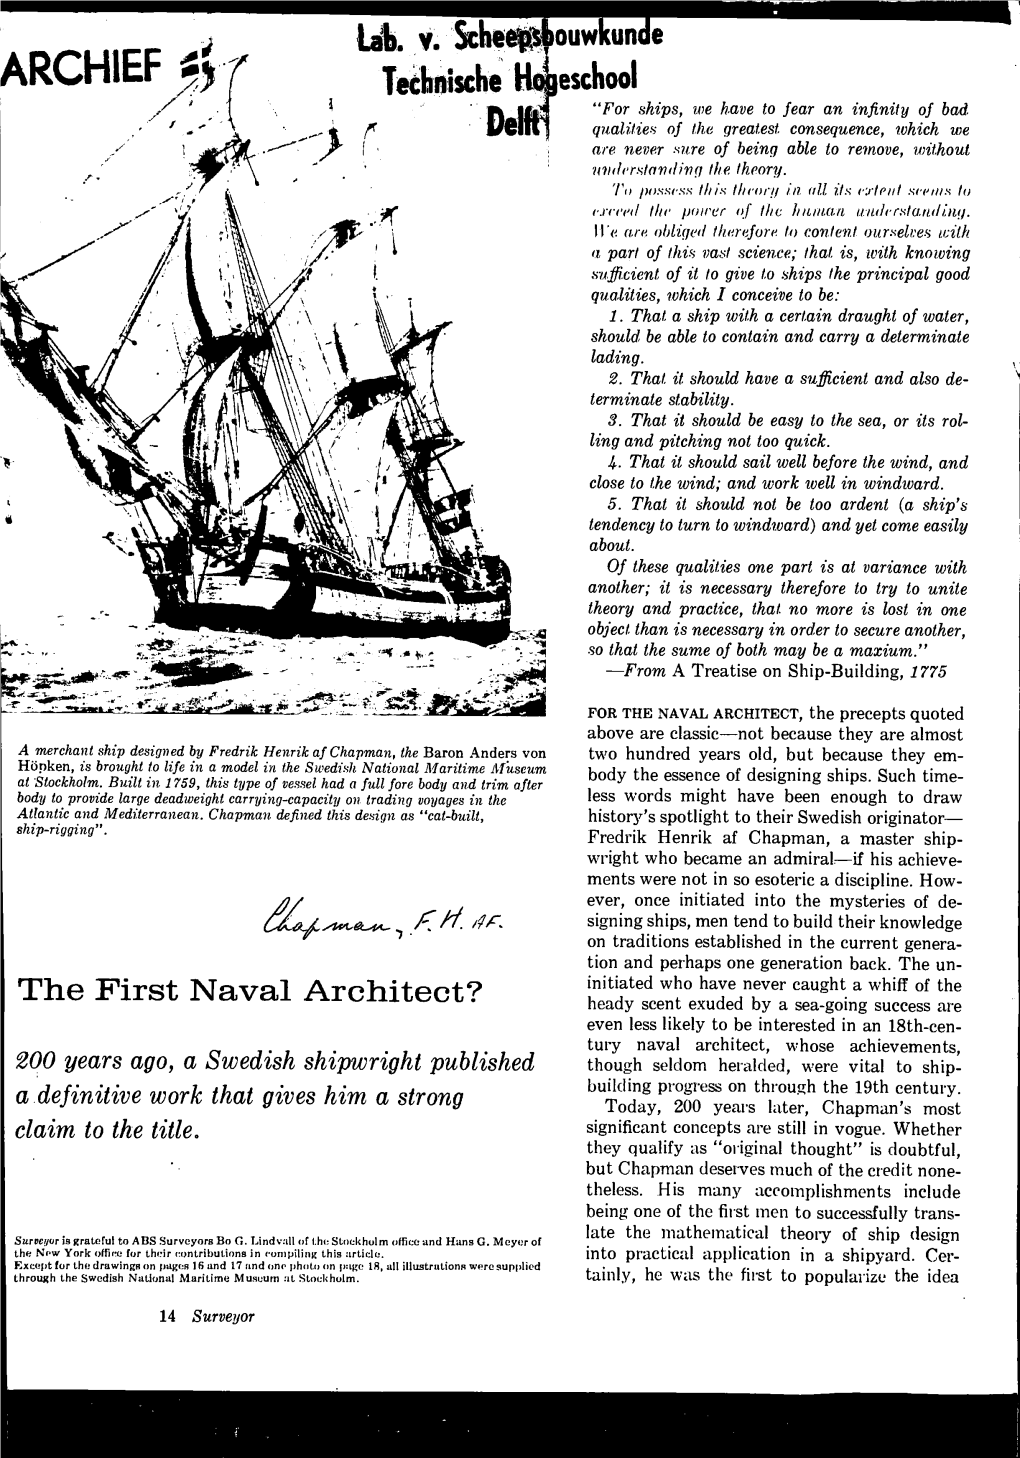 The First Naval Architect?